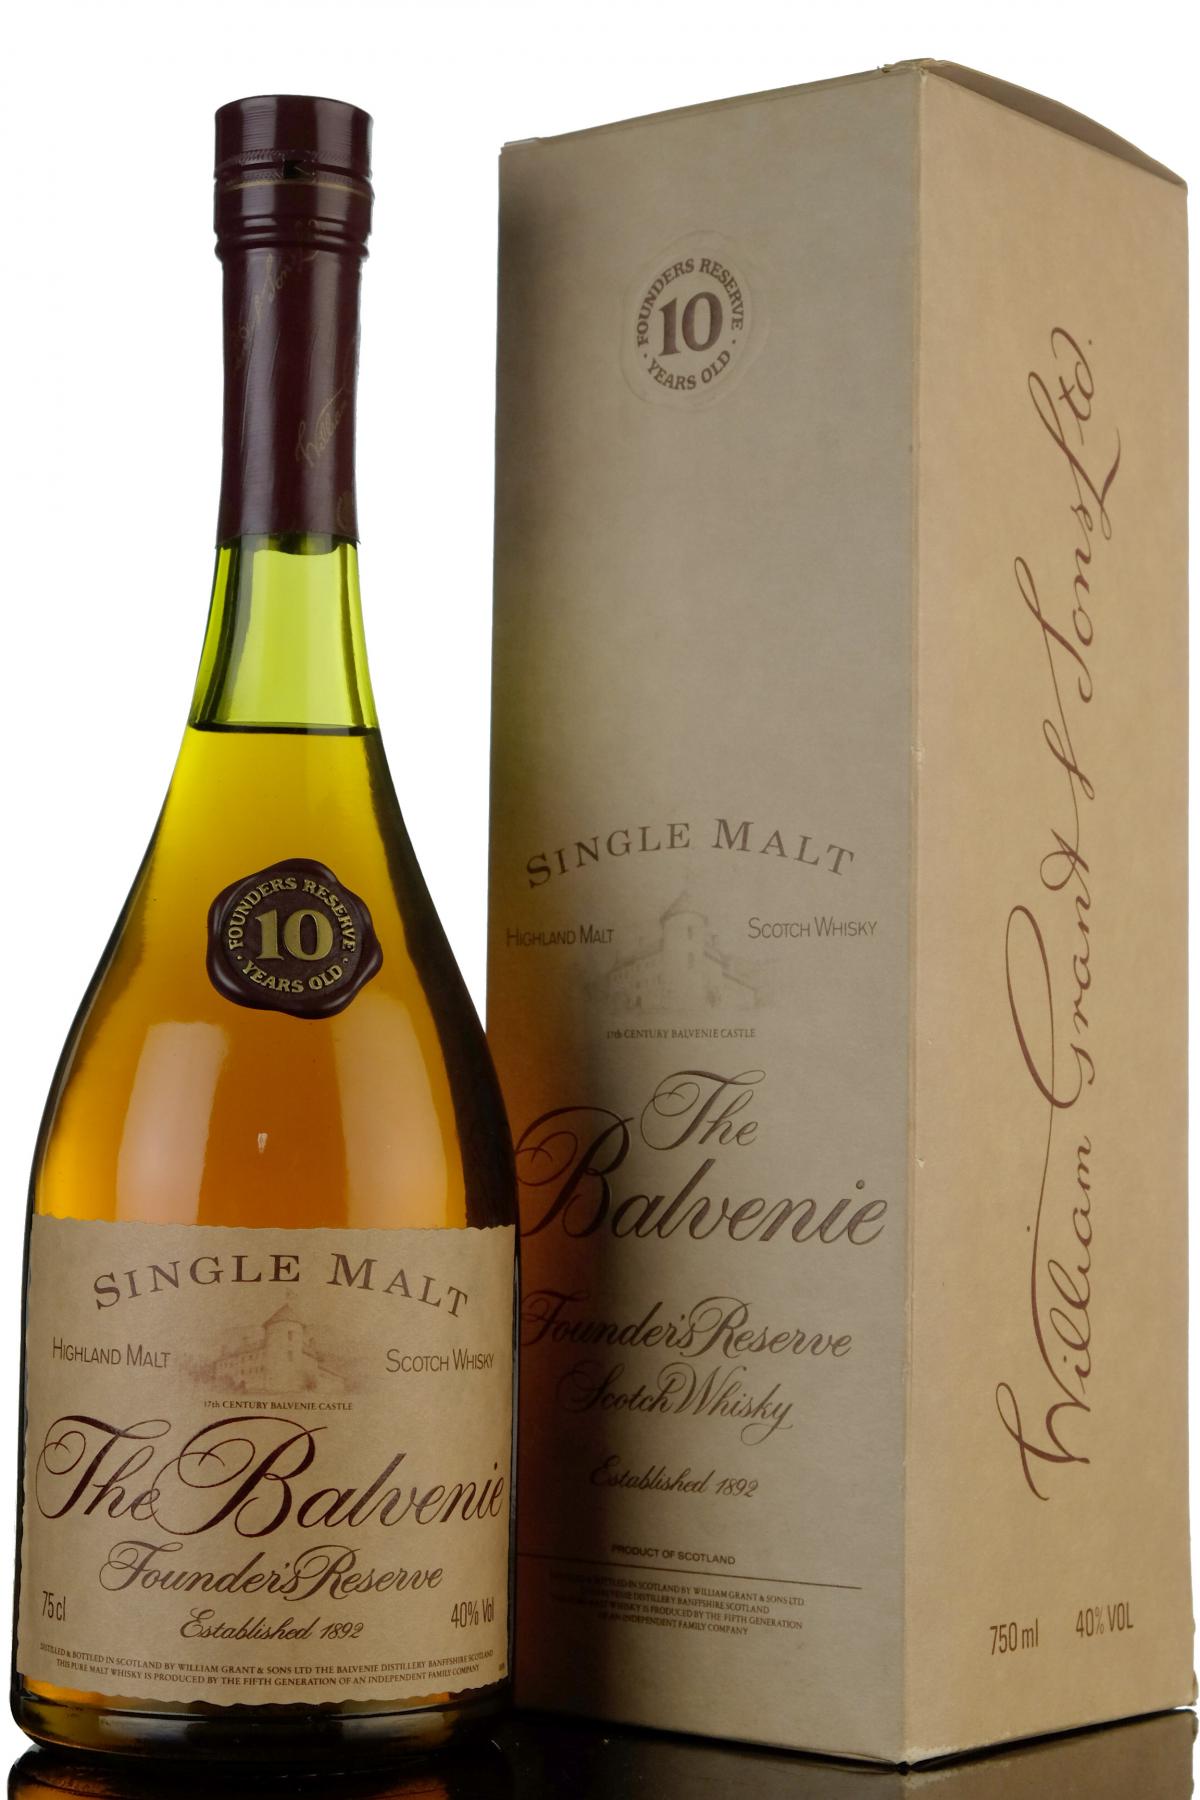 Balvenie 10 Year Old - Founders Reserve - 1980s